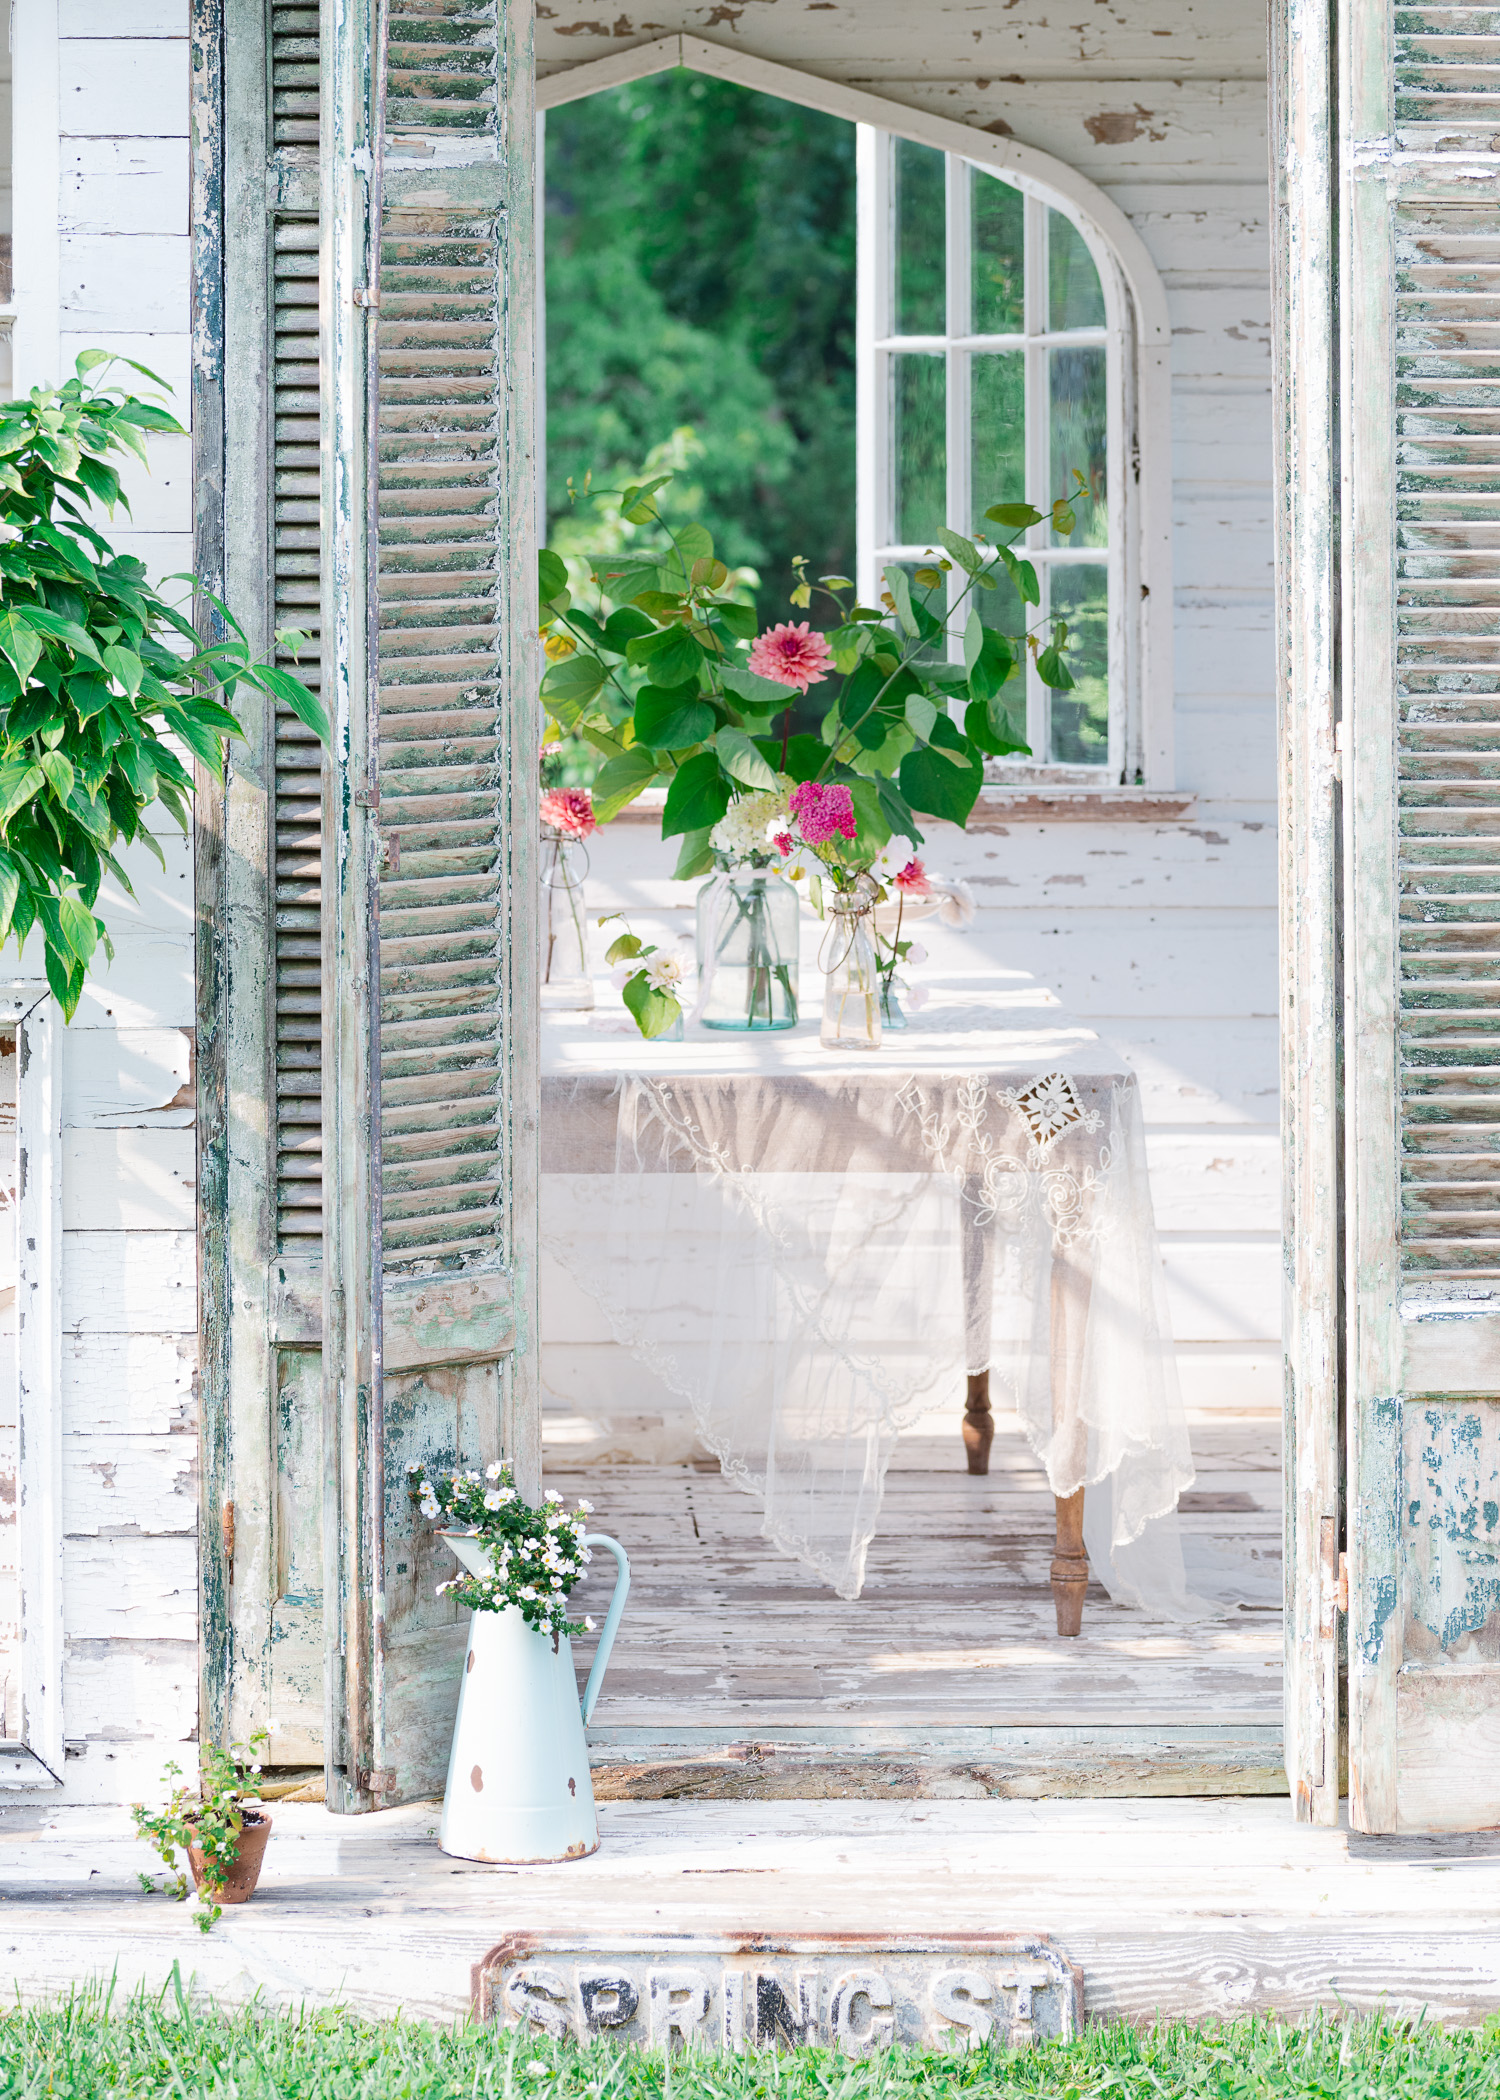 Looking inside of The Flower House. Antique French shutter doors and a bouquet of flowers. Flower Greeting Cards